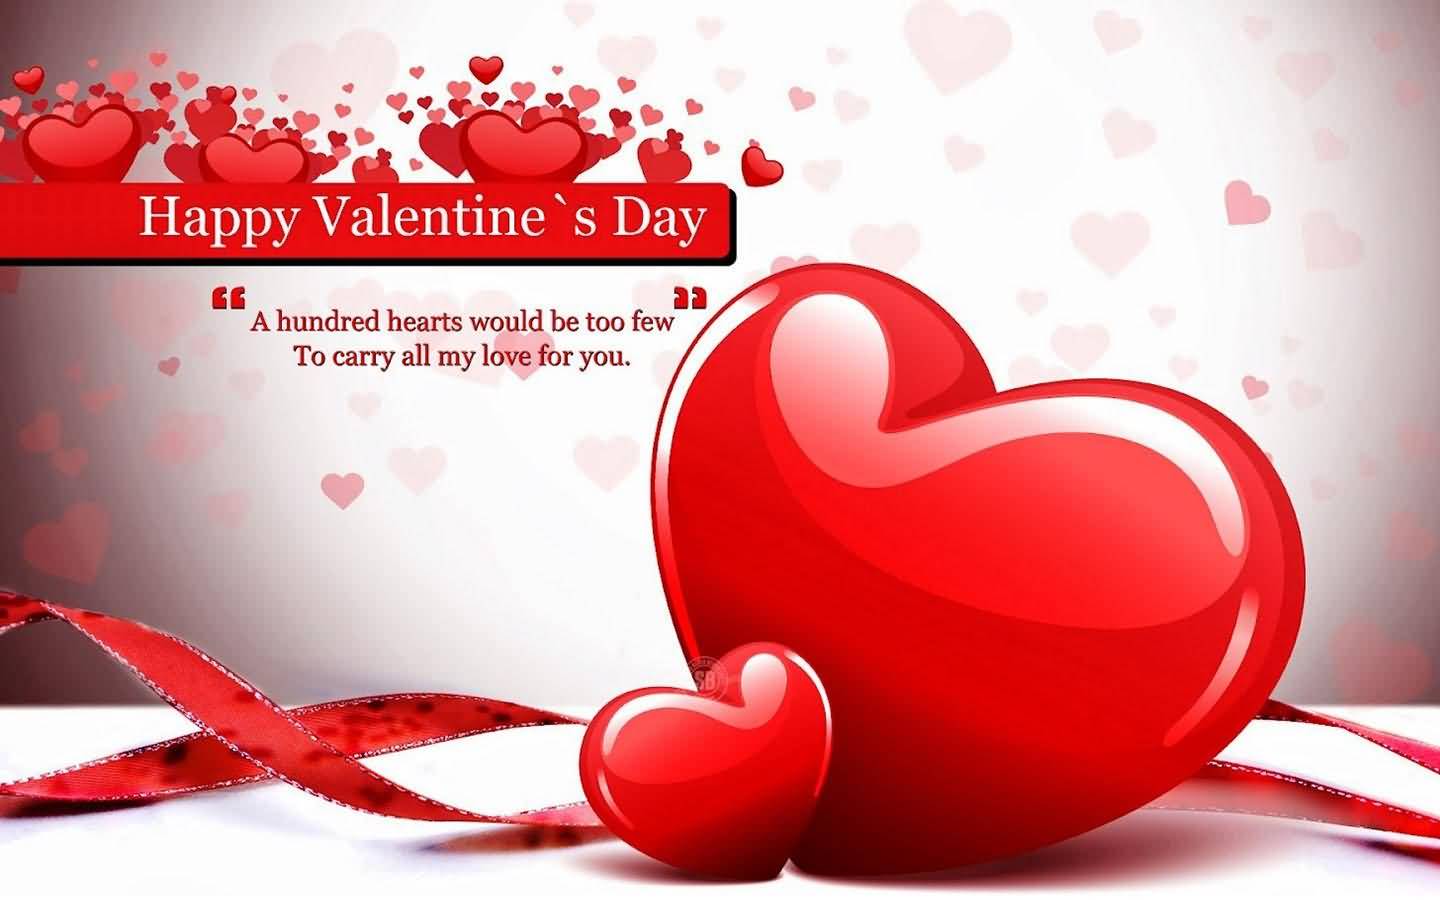 Happy Valentine's Day A Hundred Hearts Would Be Too Few To Carry All My Love For You Wallpaper